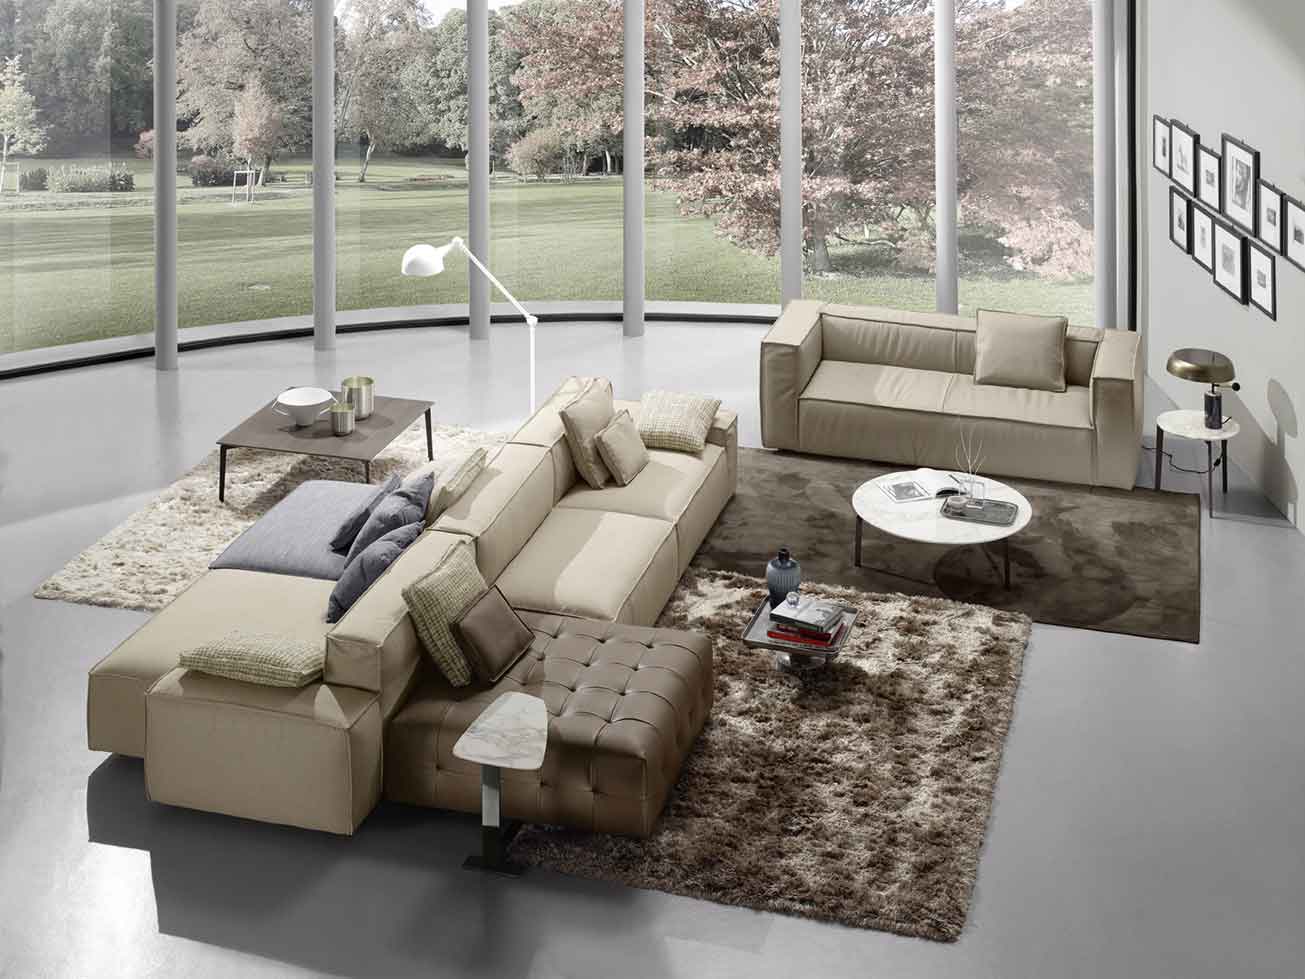 double side colorful leather sofa, brown beige blue sofa that can be adjustable to all textures and colors, beige leather sofa 3-seater, marble circular table, marble side table, marmarino kentriko trapezaki, 